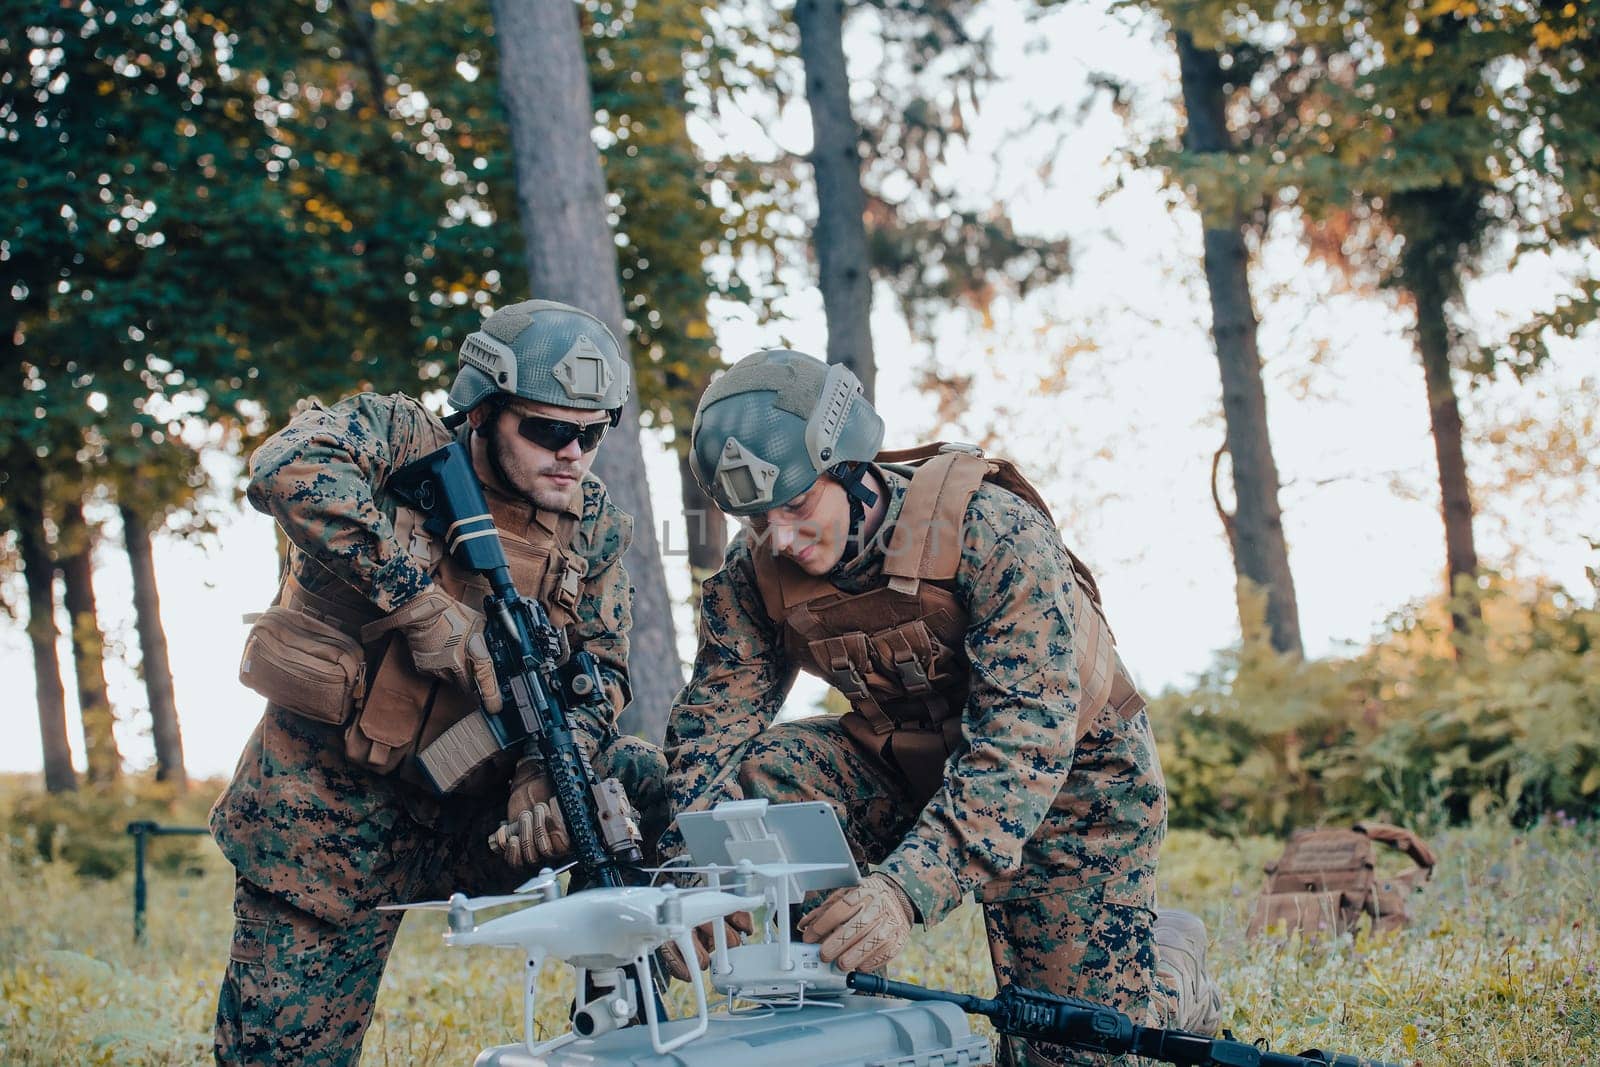 Modern Warfare Soldiers Squad are Using Drone for Scouting and Surveillance During Military Operation in the Forest. by dotshock